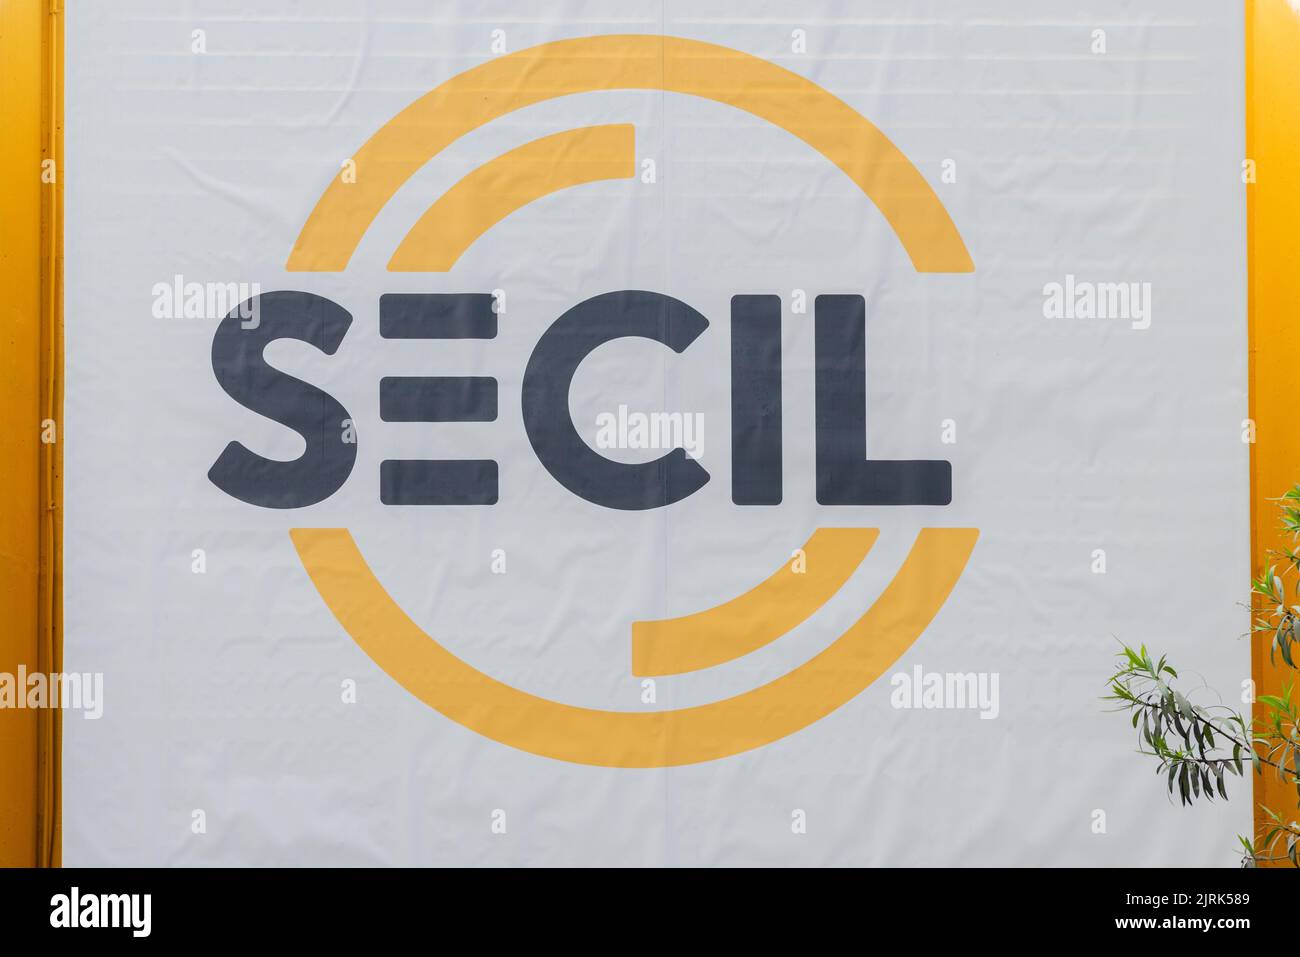 The advertising panel of the company that produces cement called Secil in Setubal, Portugal. Stock Photo